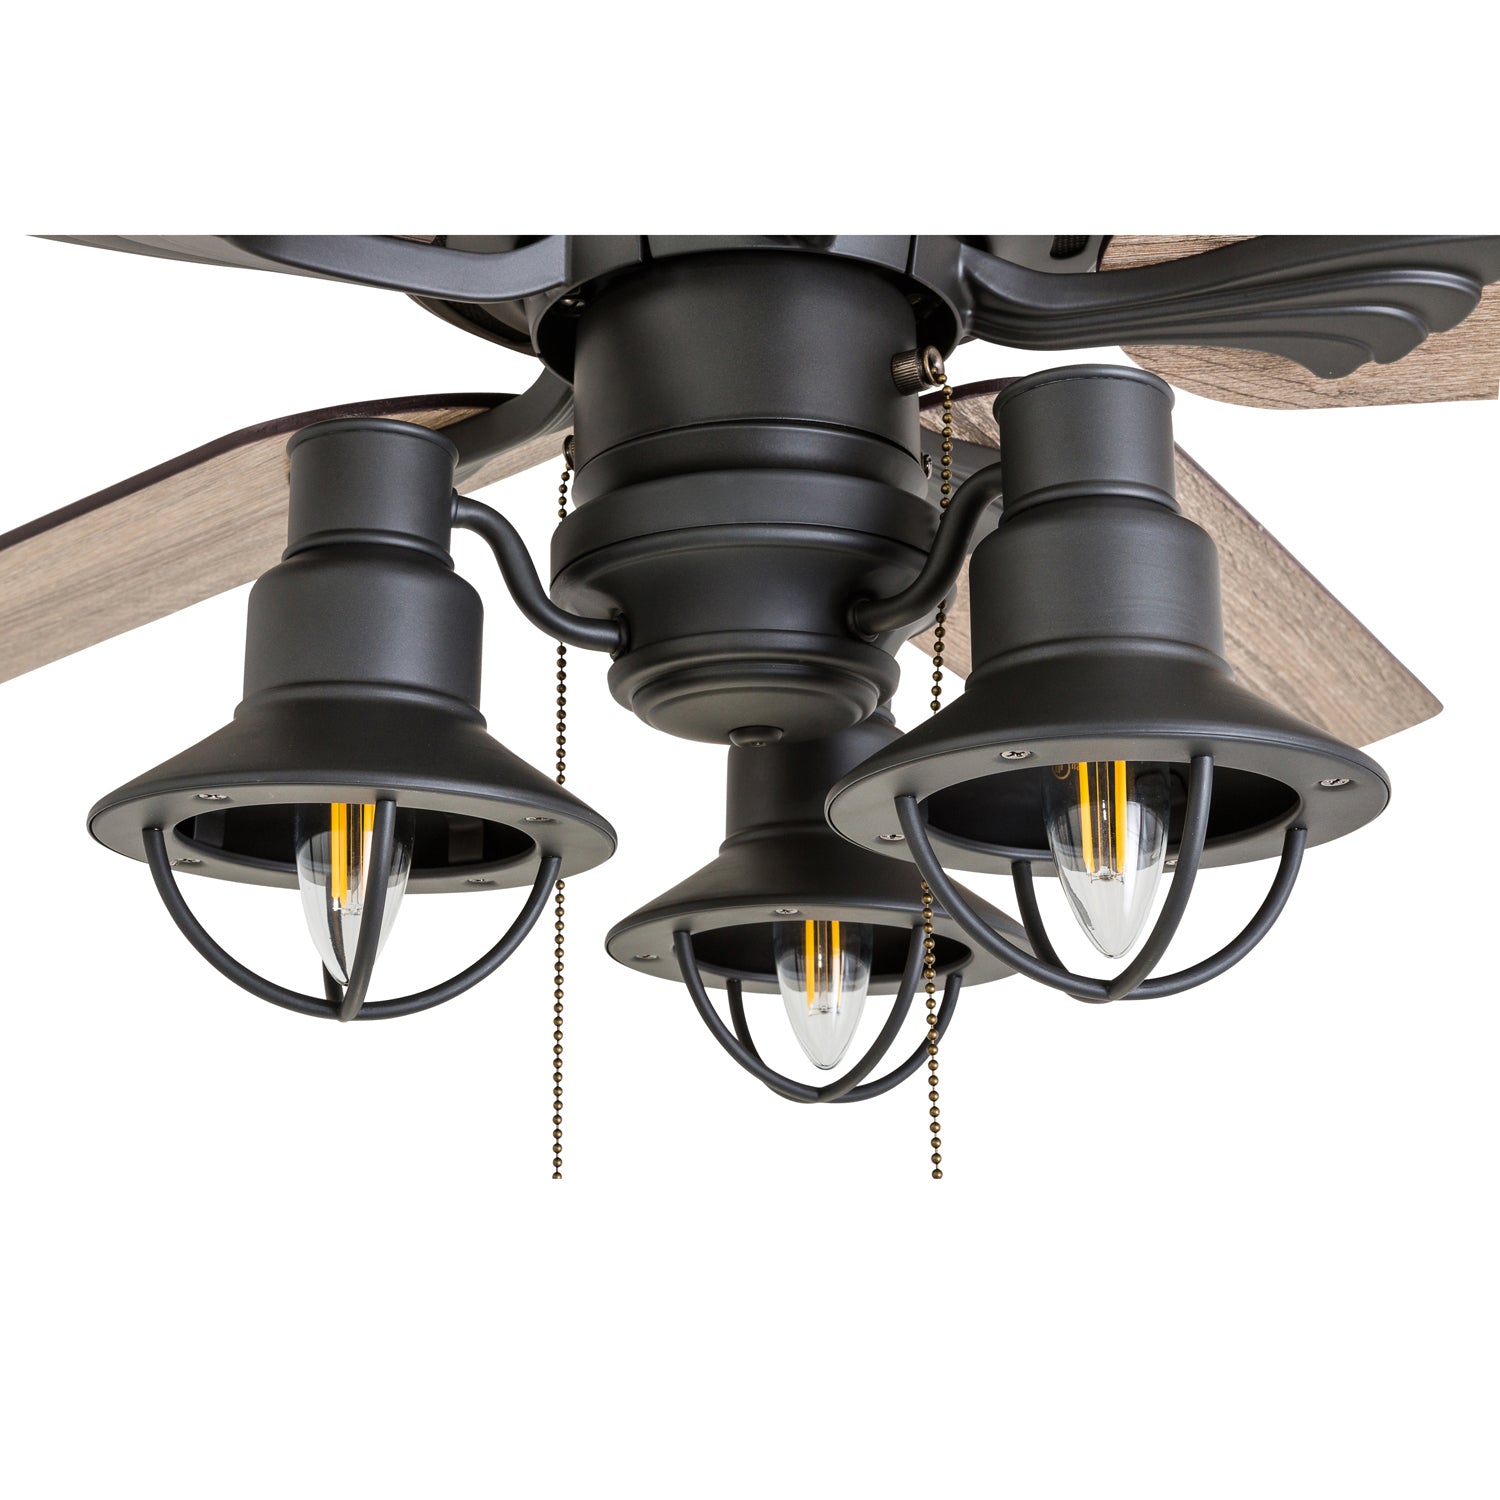 52 Inch Sivan, Bronze, Pull Chain, Ceiling Fan by Prominence Home